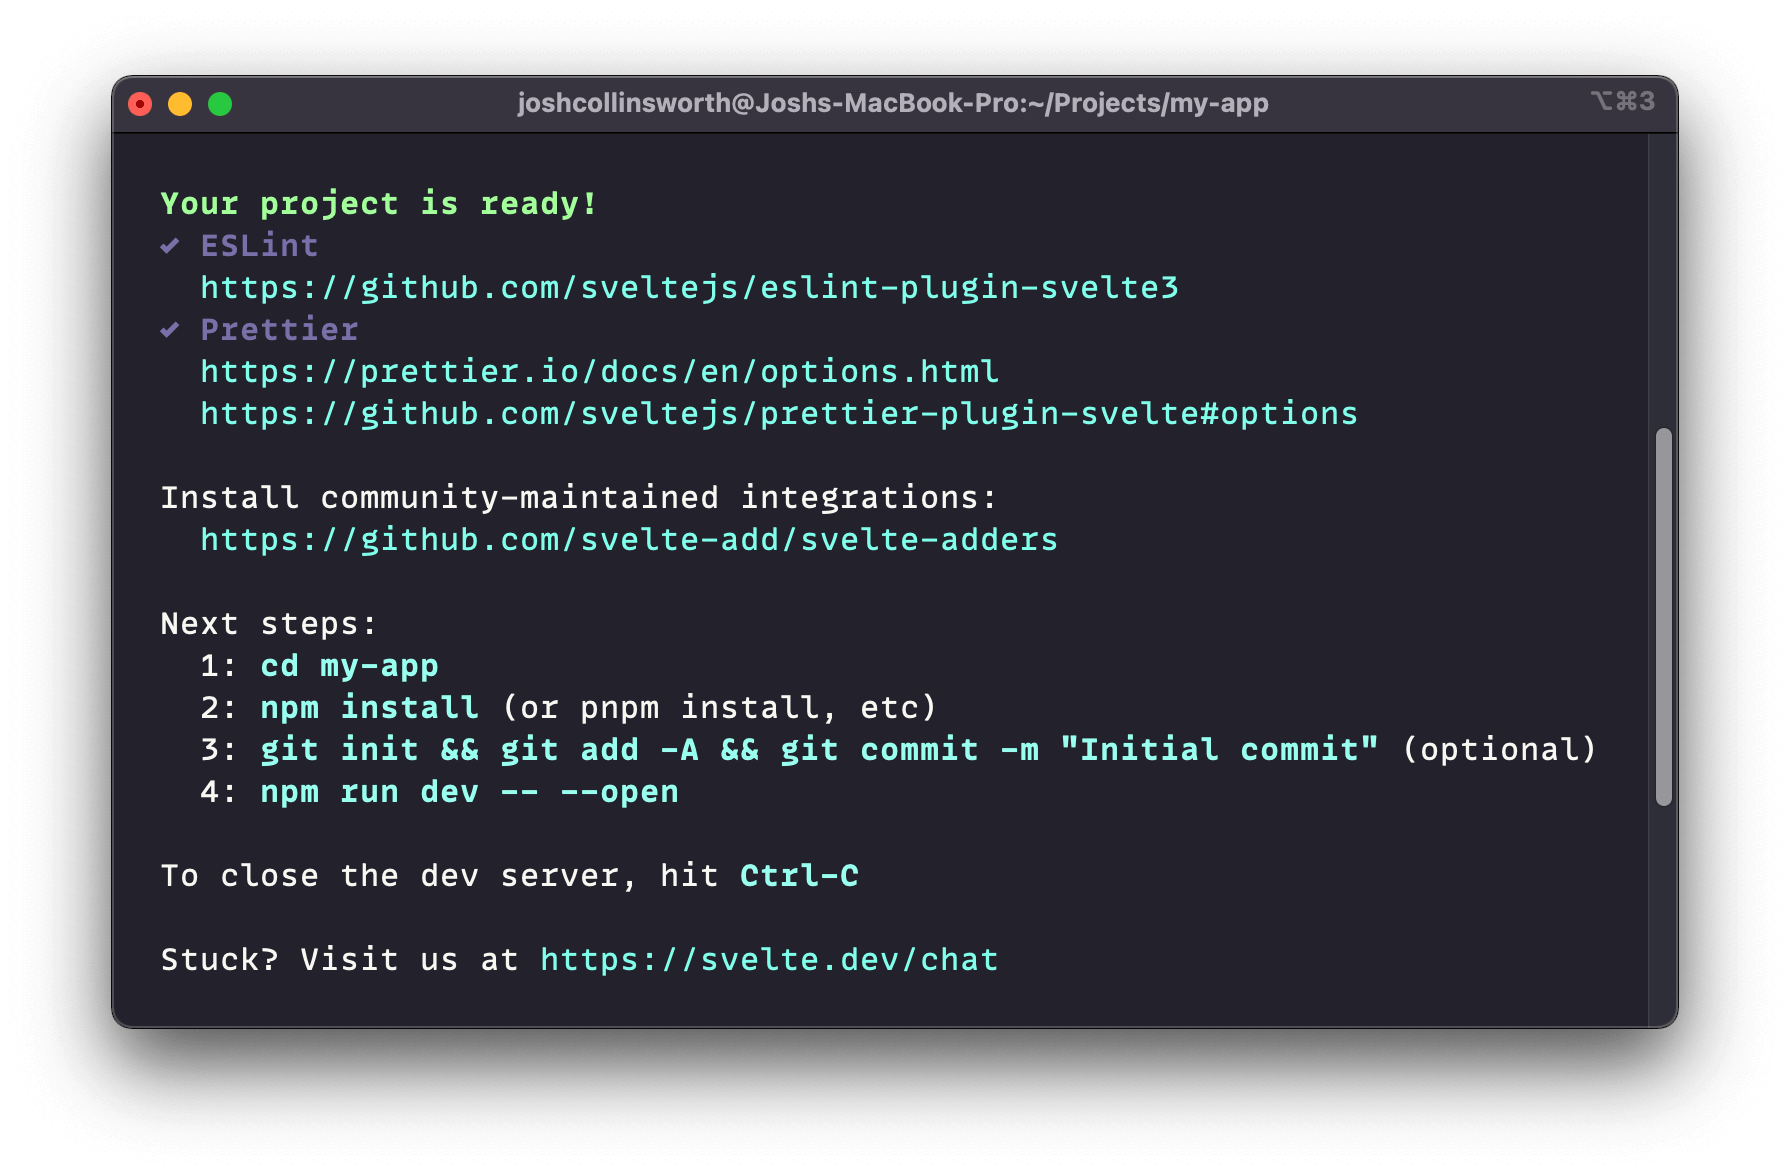 'Your project is ready!' message appears in the terminal, along with confirmation of the options we've chosen and helpful links to get started.